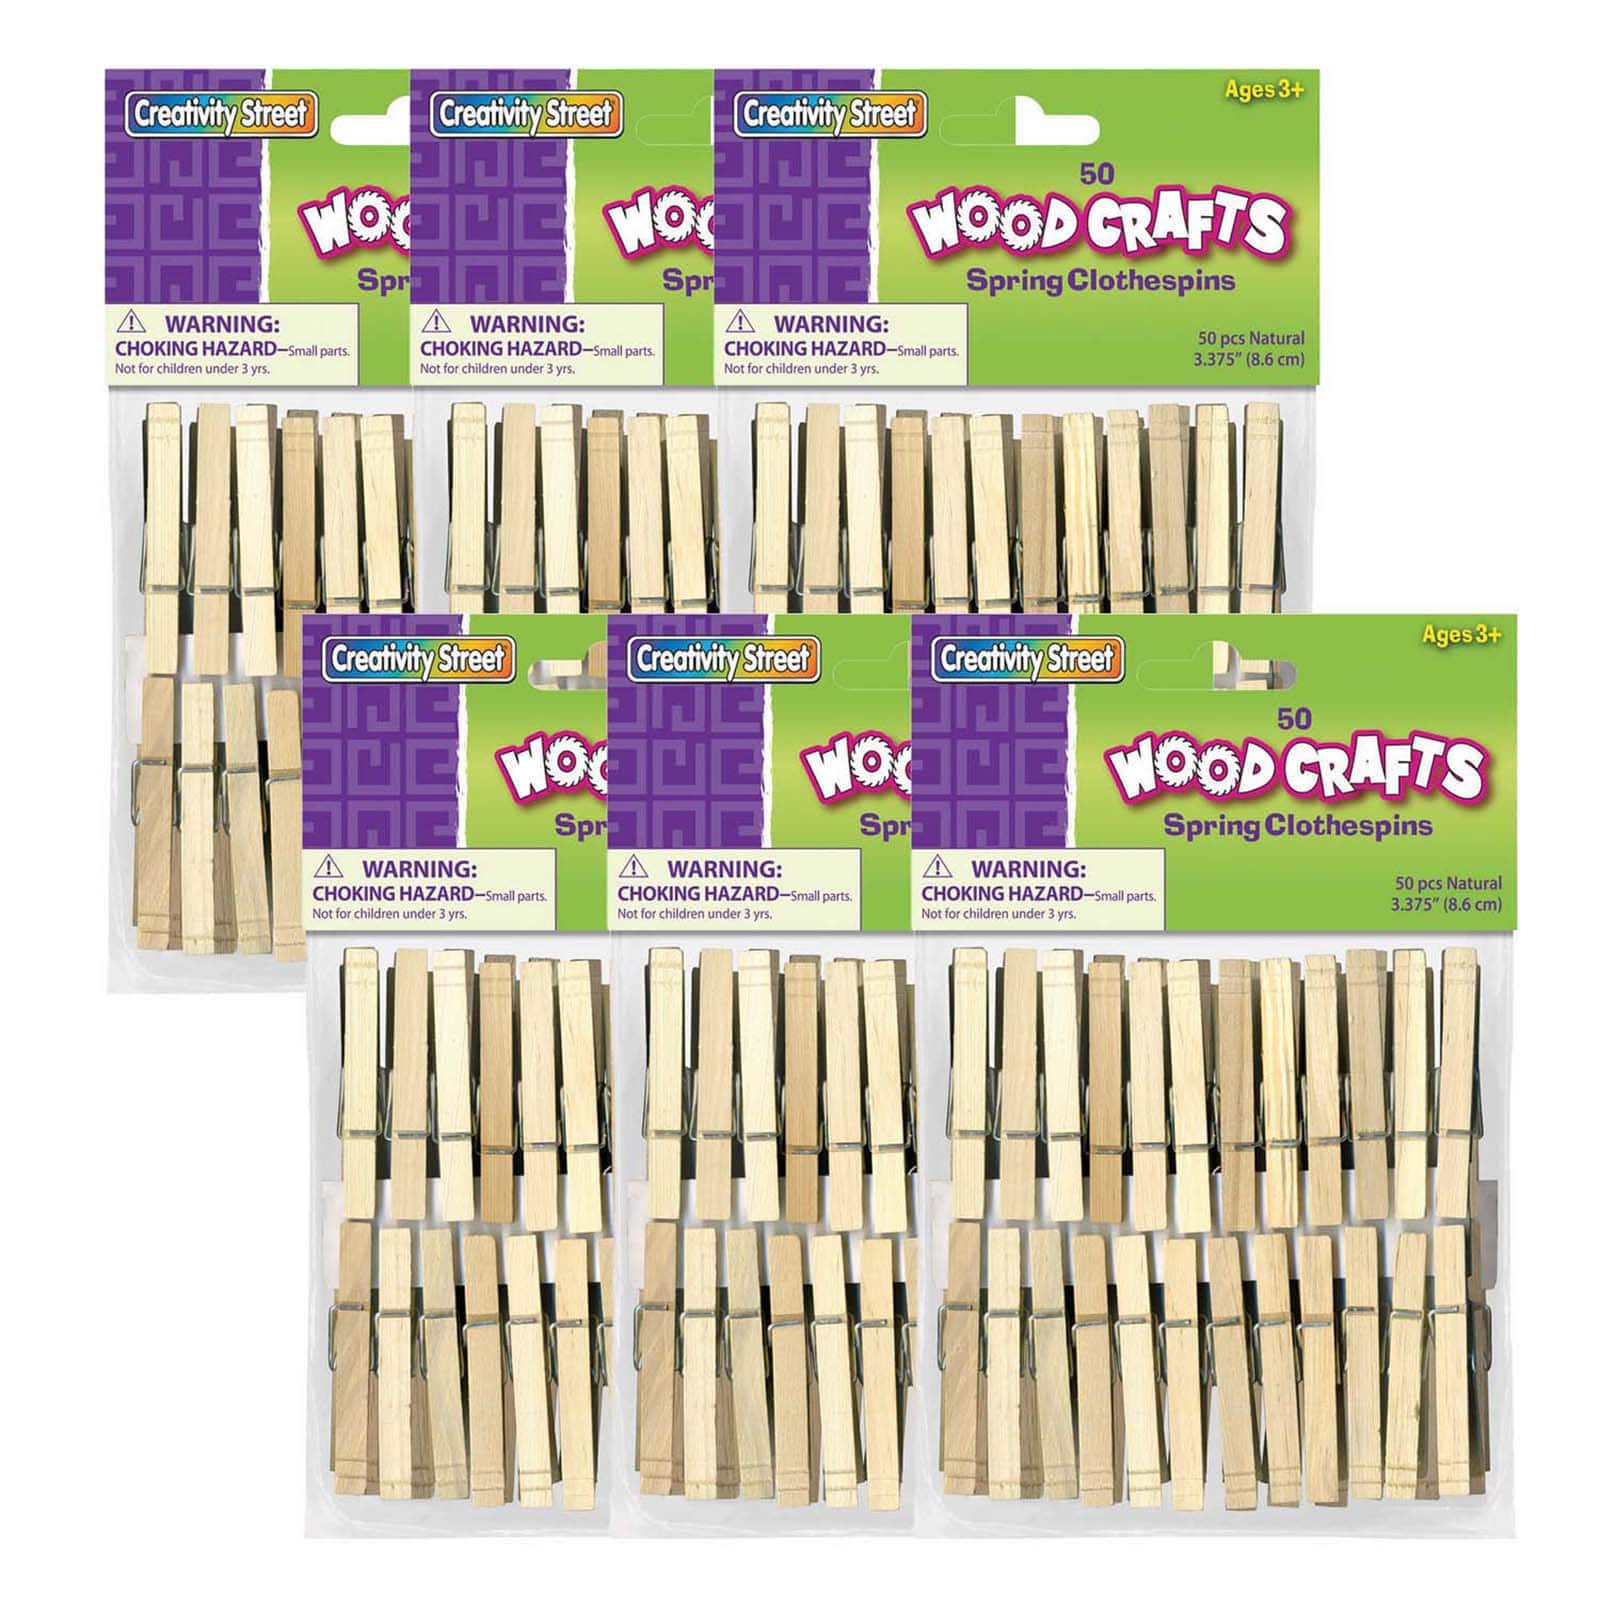 Creativity Street Natural Flat Slotted Clothespins